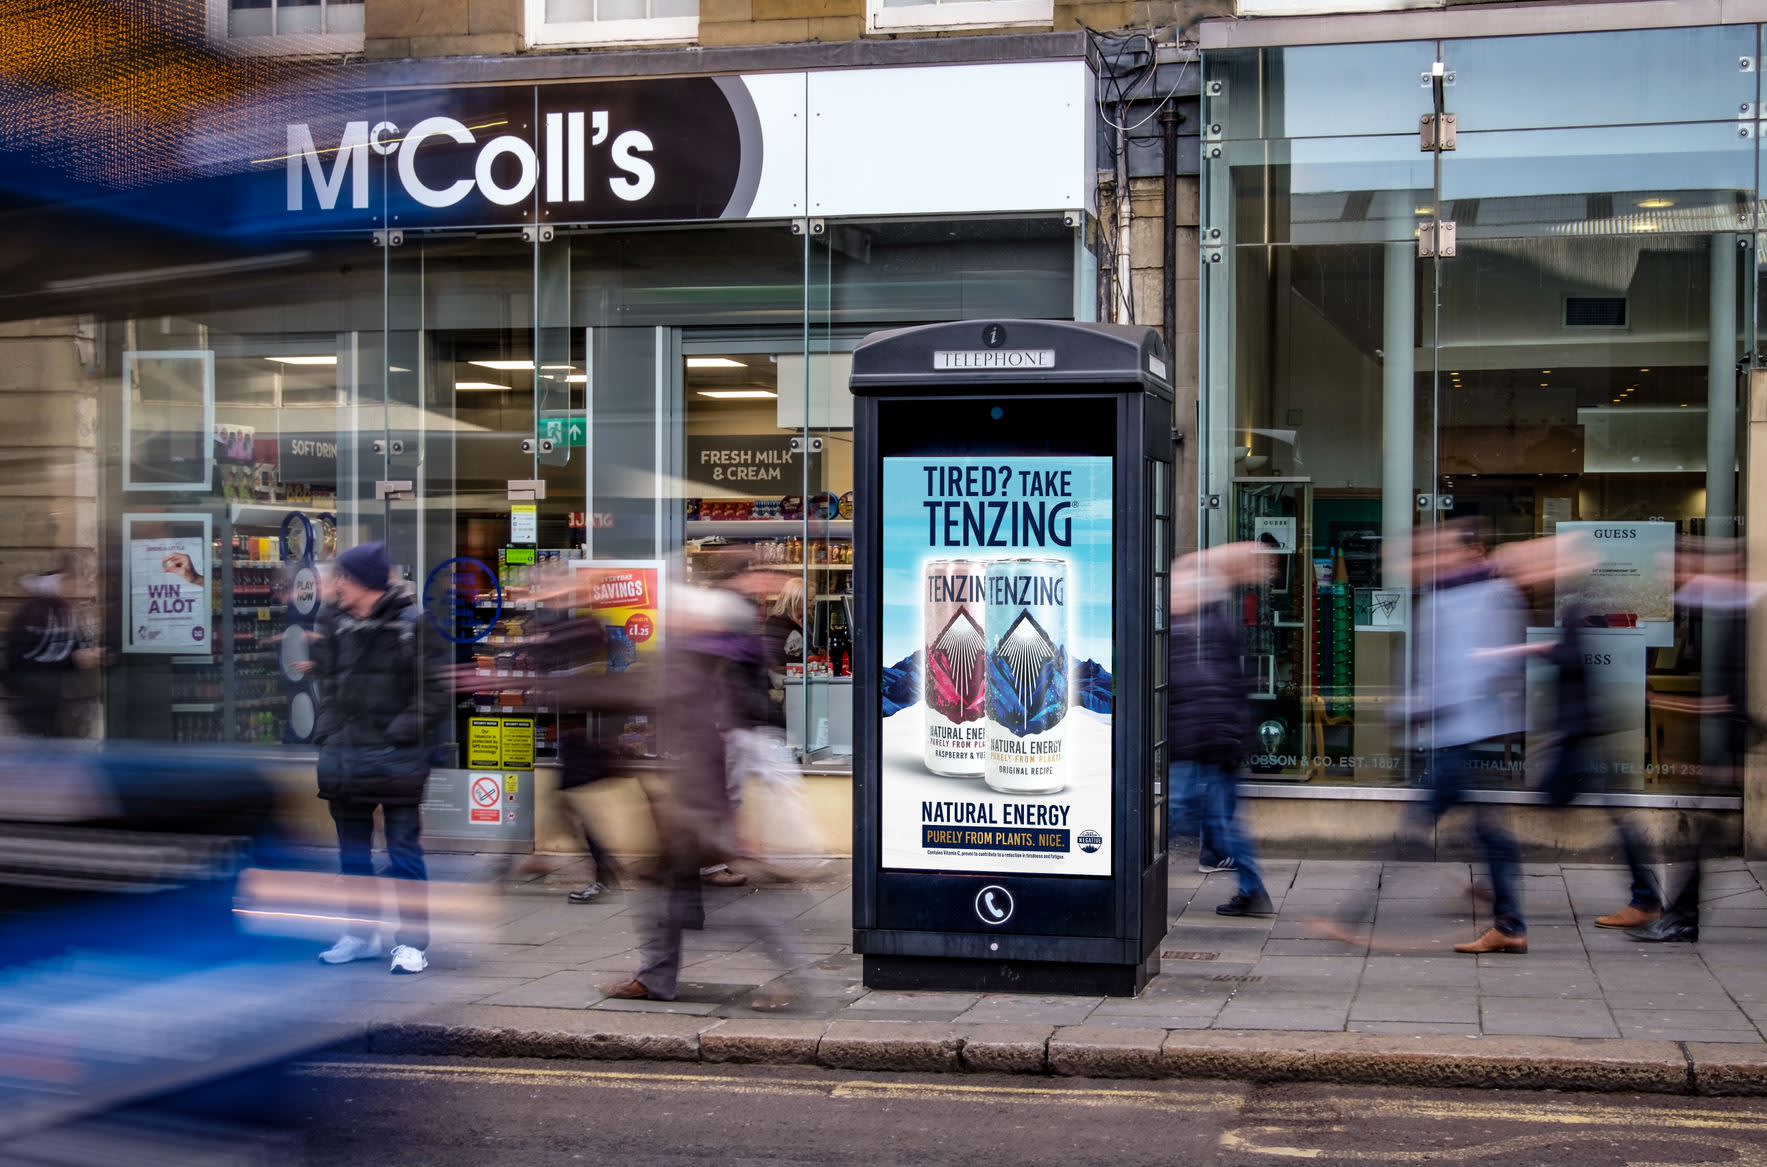 Phone box digital screen outside McColl's showing ad for Tenzing